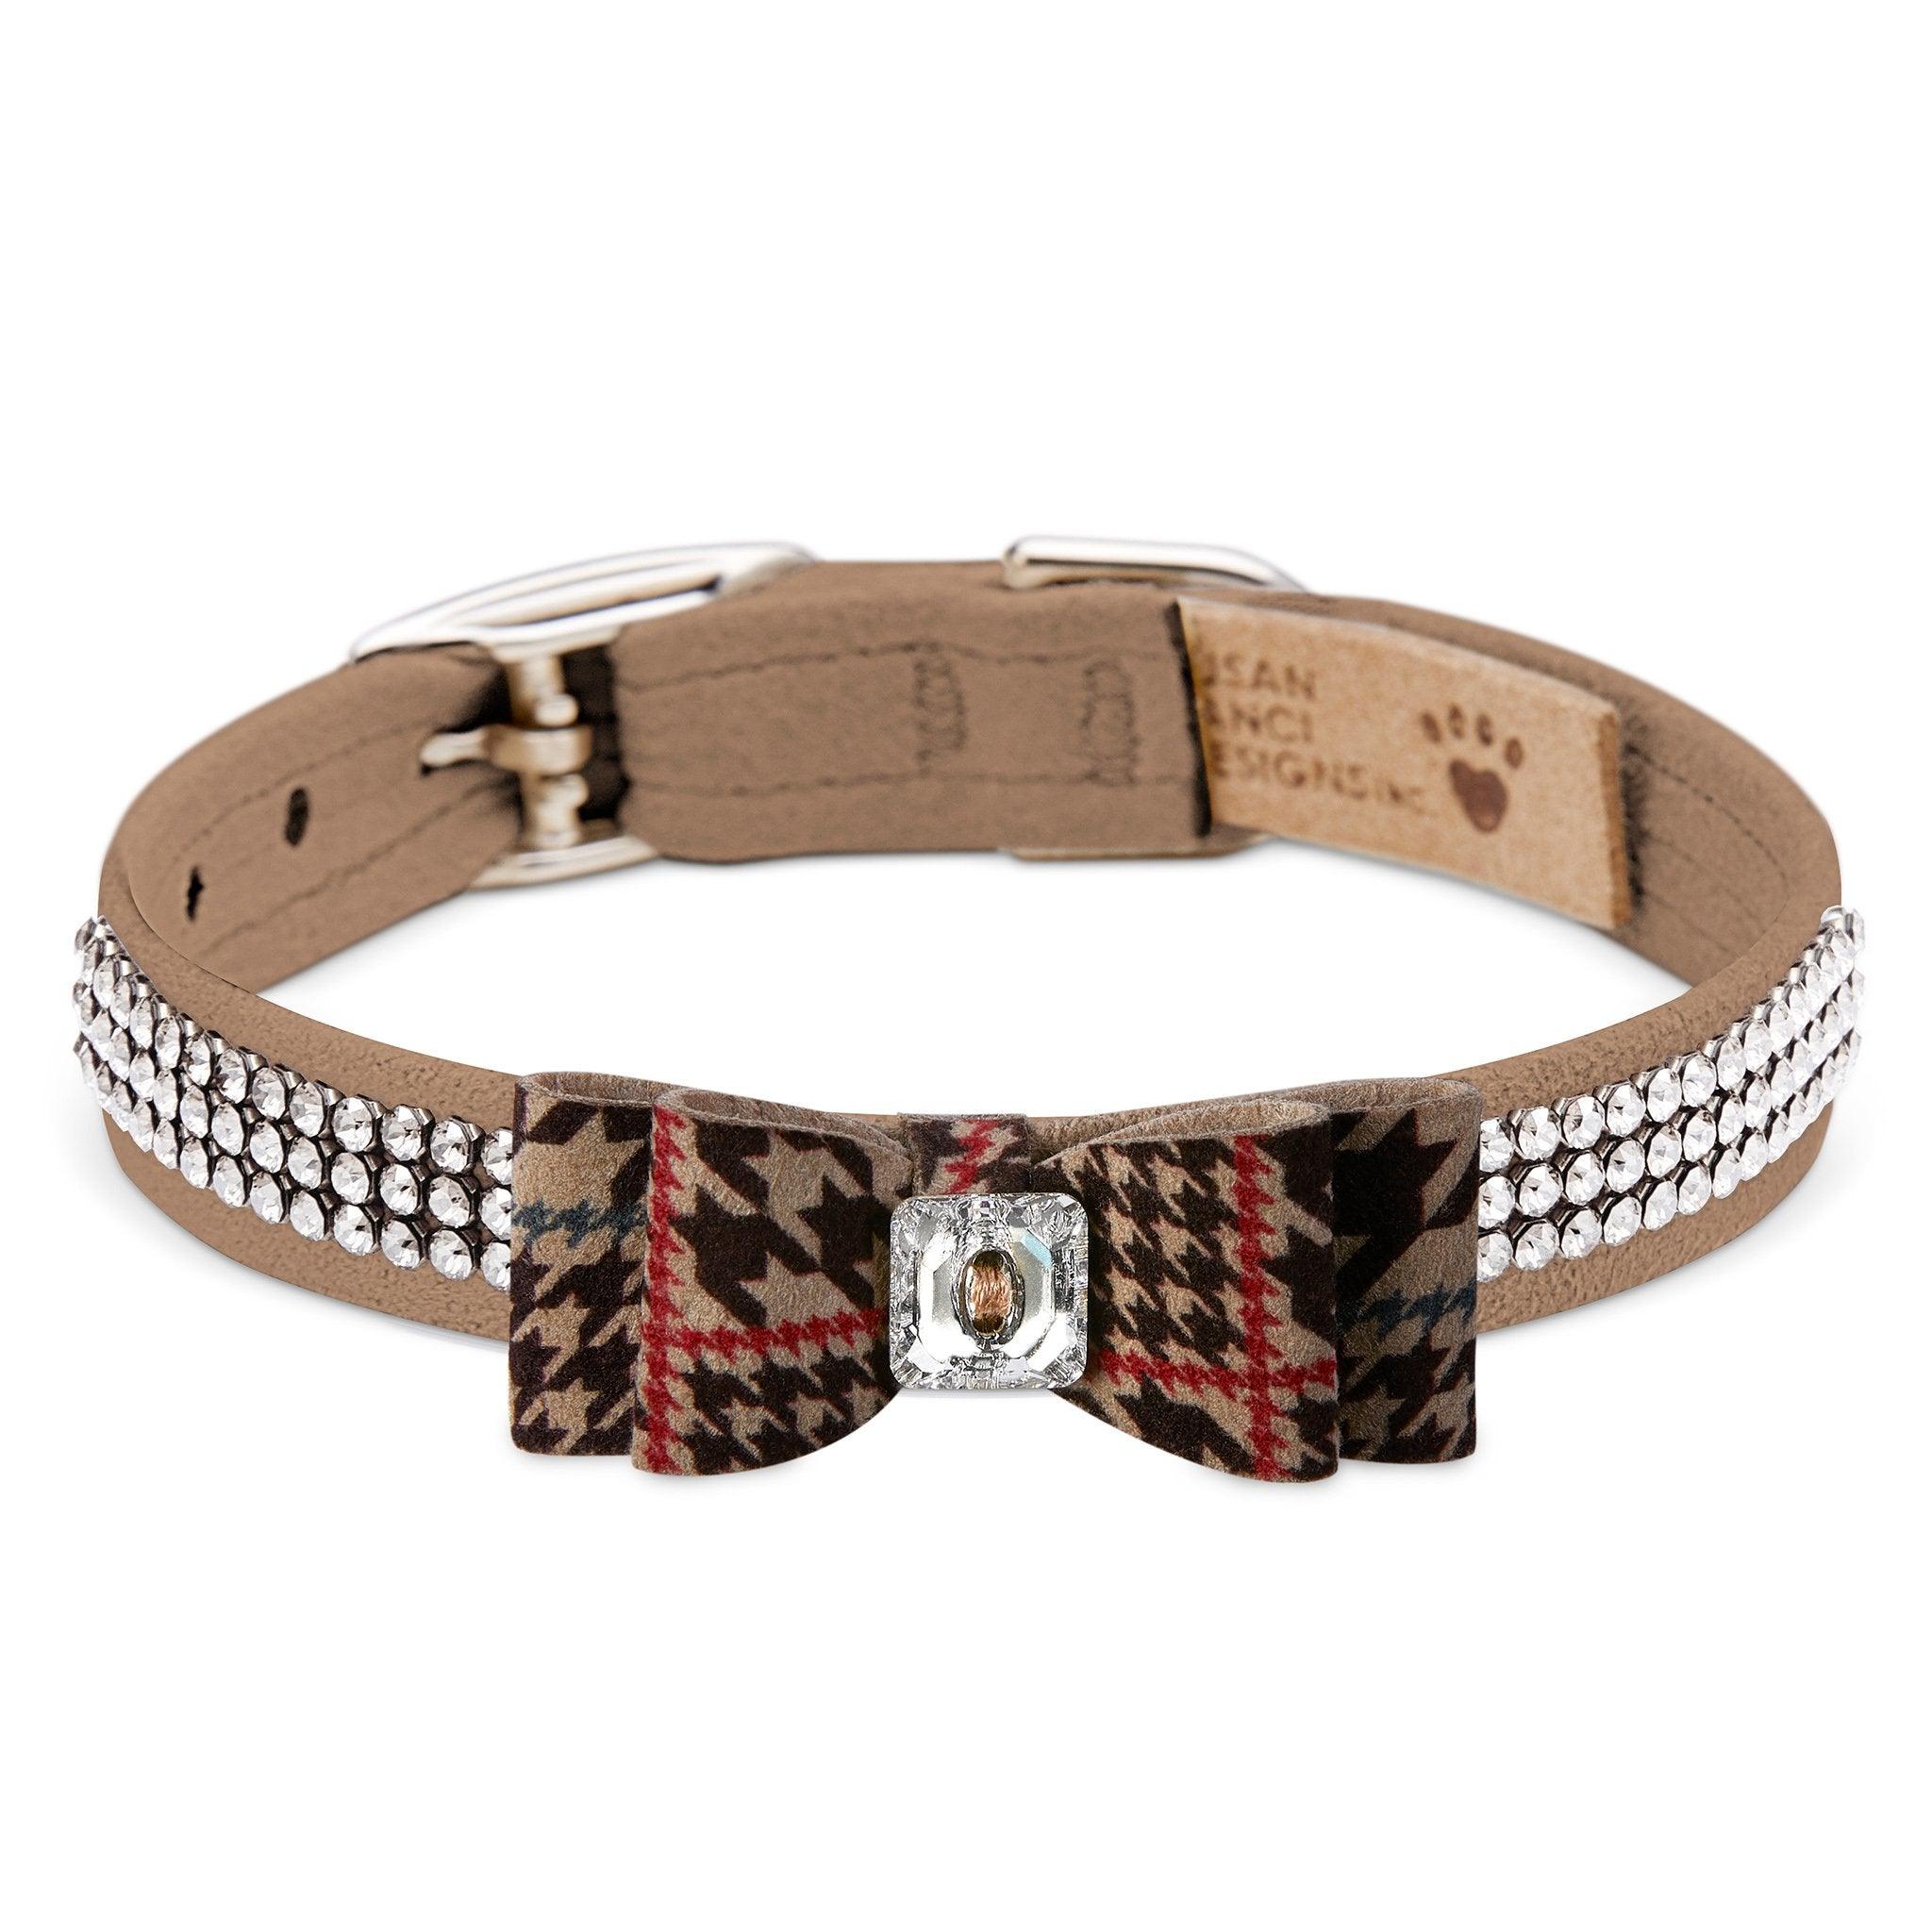 Glen Houndstooth Big Bow 3 Row Giltmore Collar - Rocky & Maggie's Pet Boutique and Salon